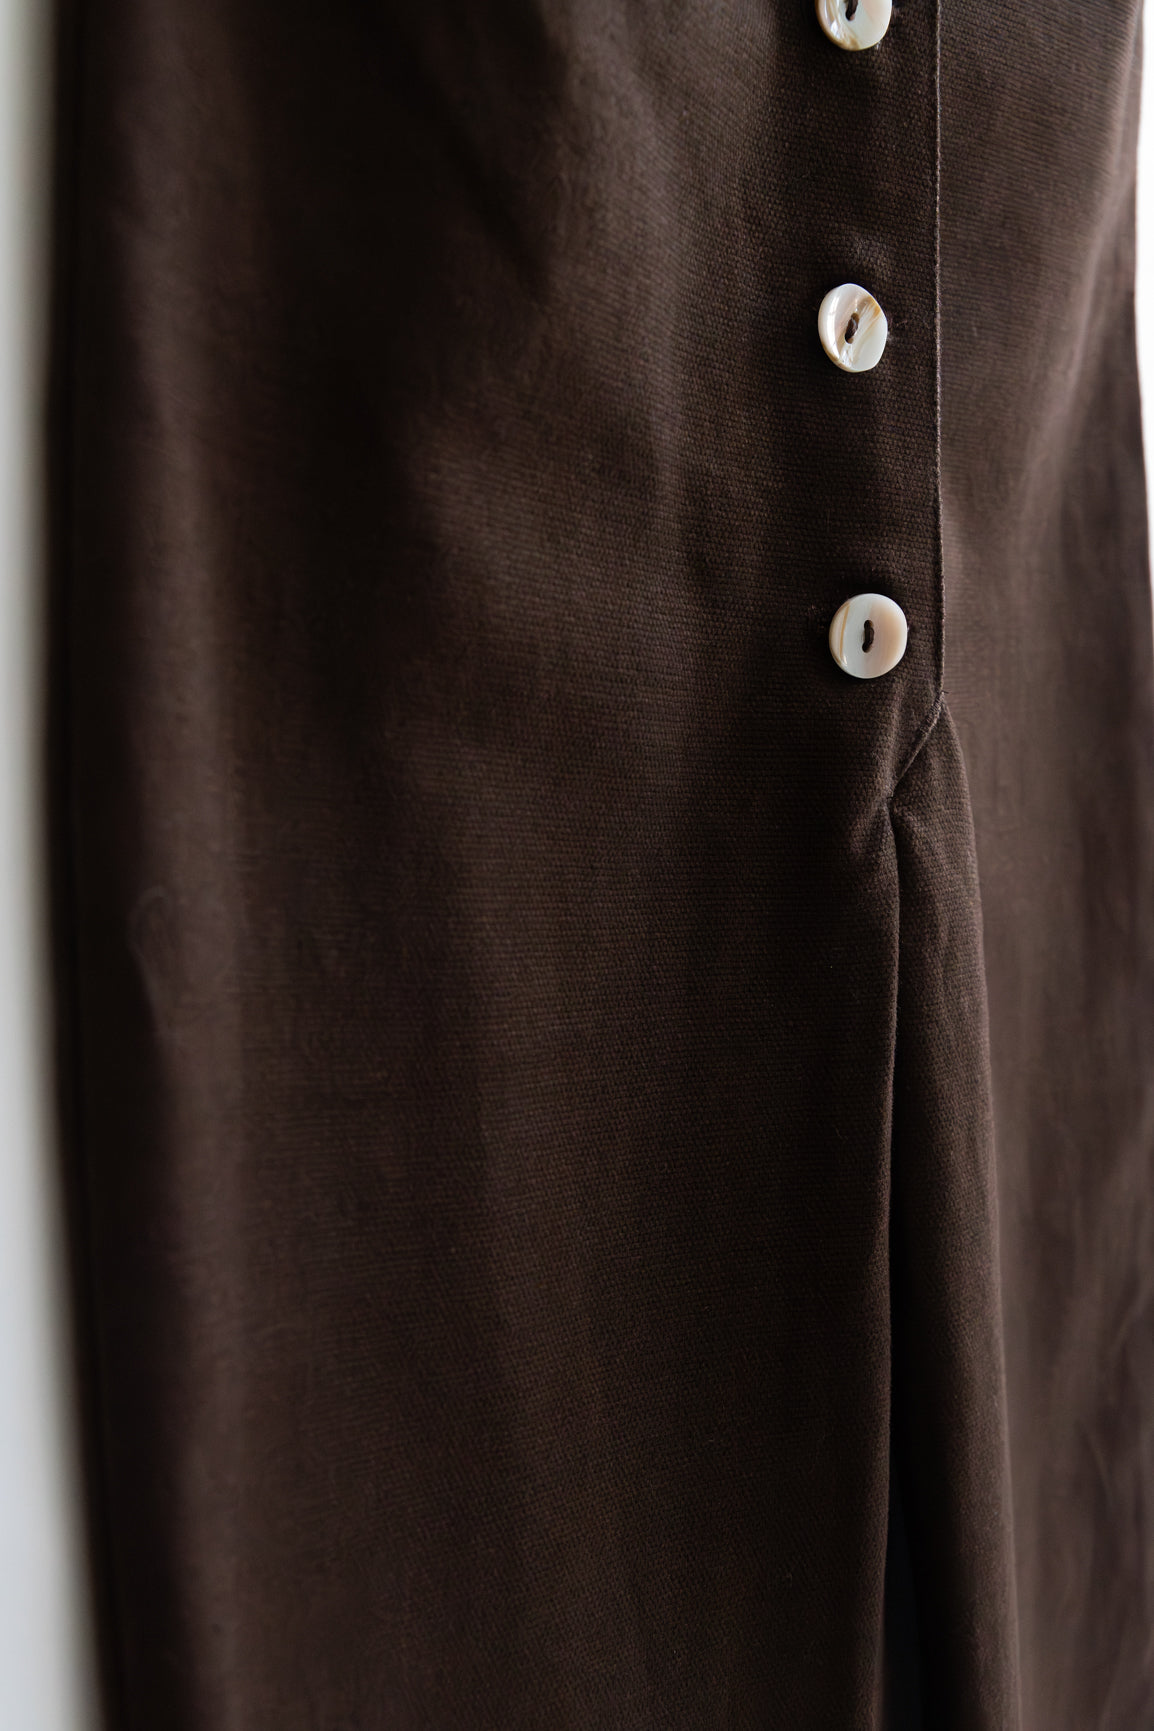 Dark Brown umber chocolate color Jumpsuit overall workwear cotton canvas with pockets 5 buttons v-neck tall girls short girls oeko-tex sustainable clothes handmade